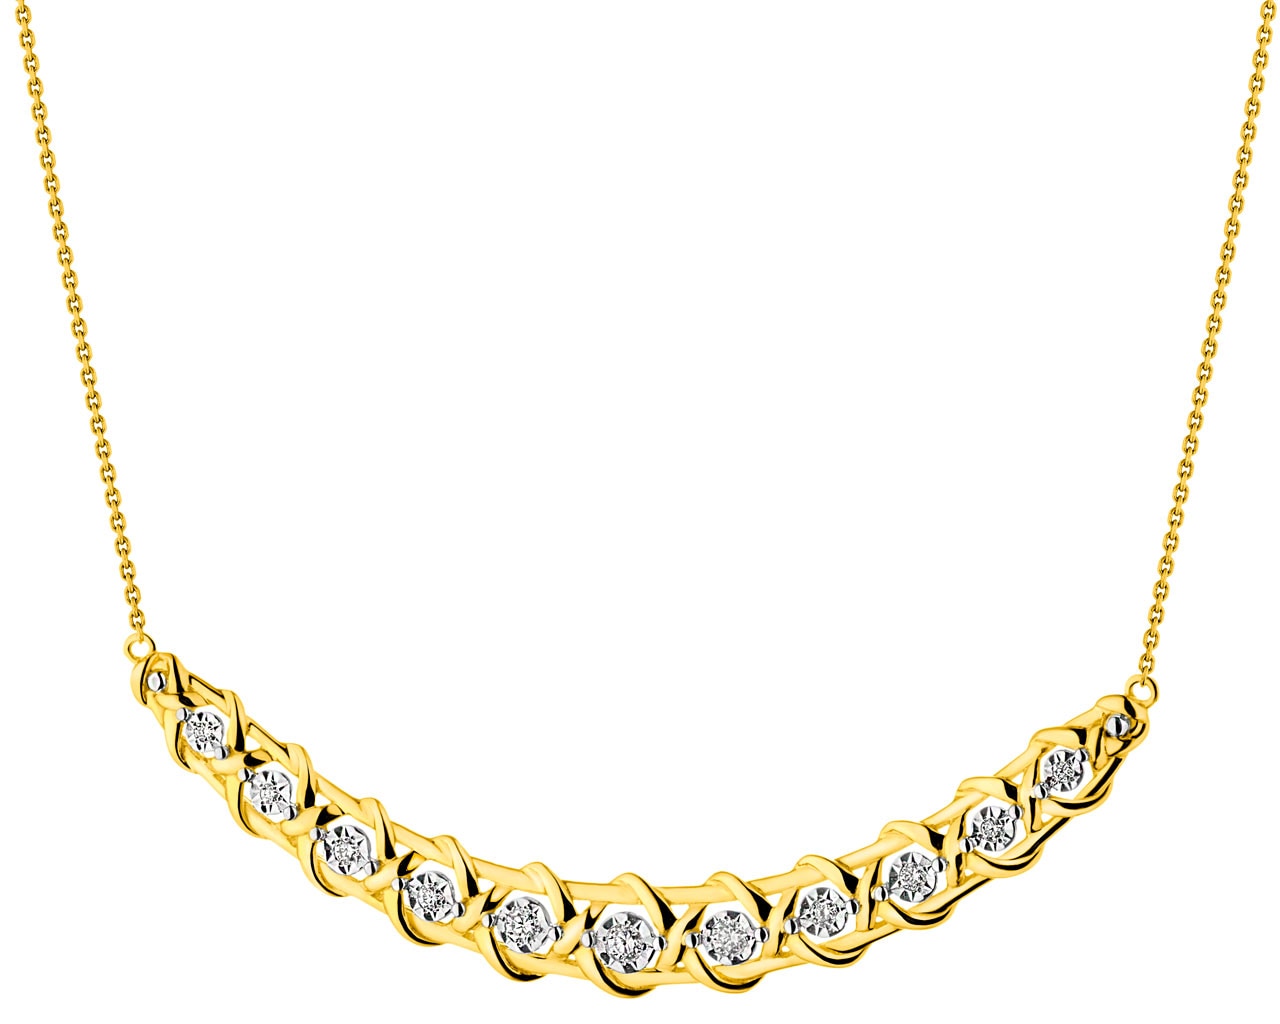 14 K Rhodium-Plated Yellow Gold Necklace with Diamonds 0,10 ct - fineness 14 K